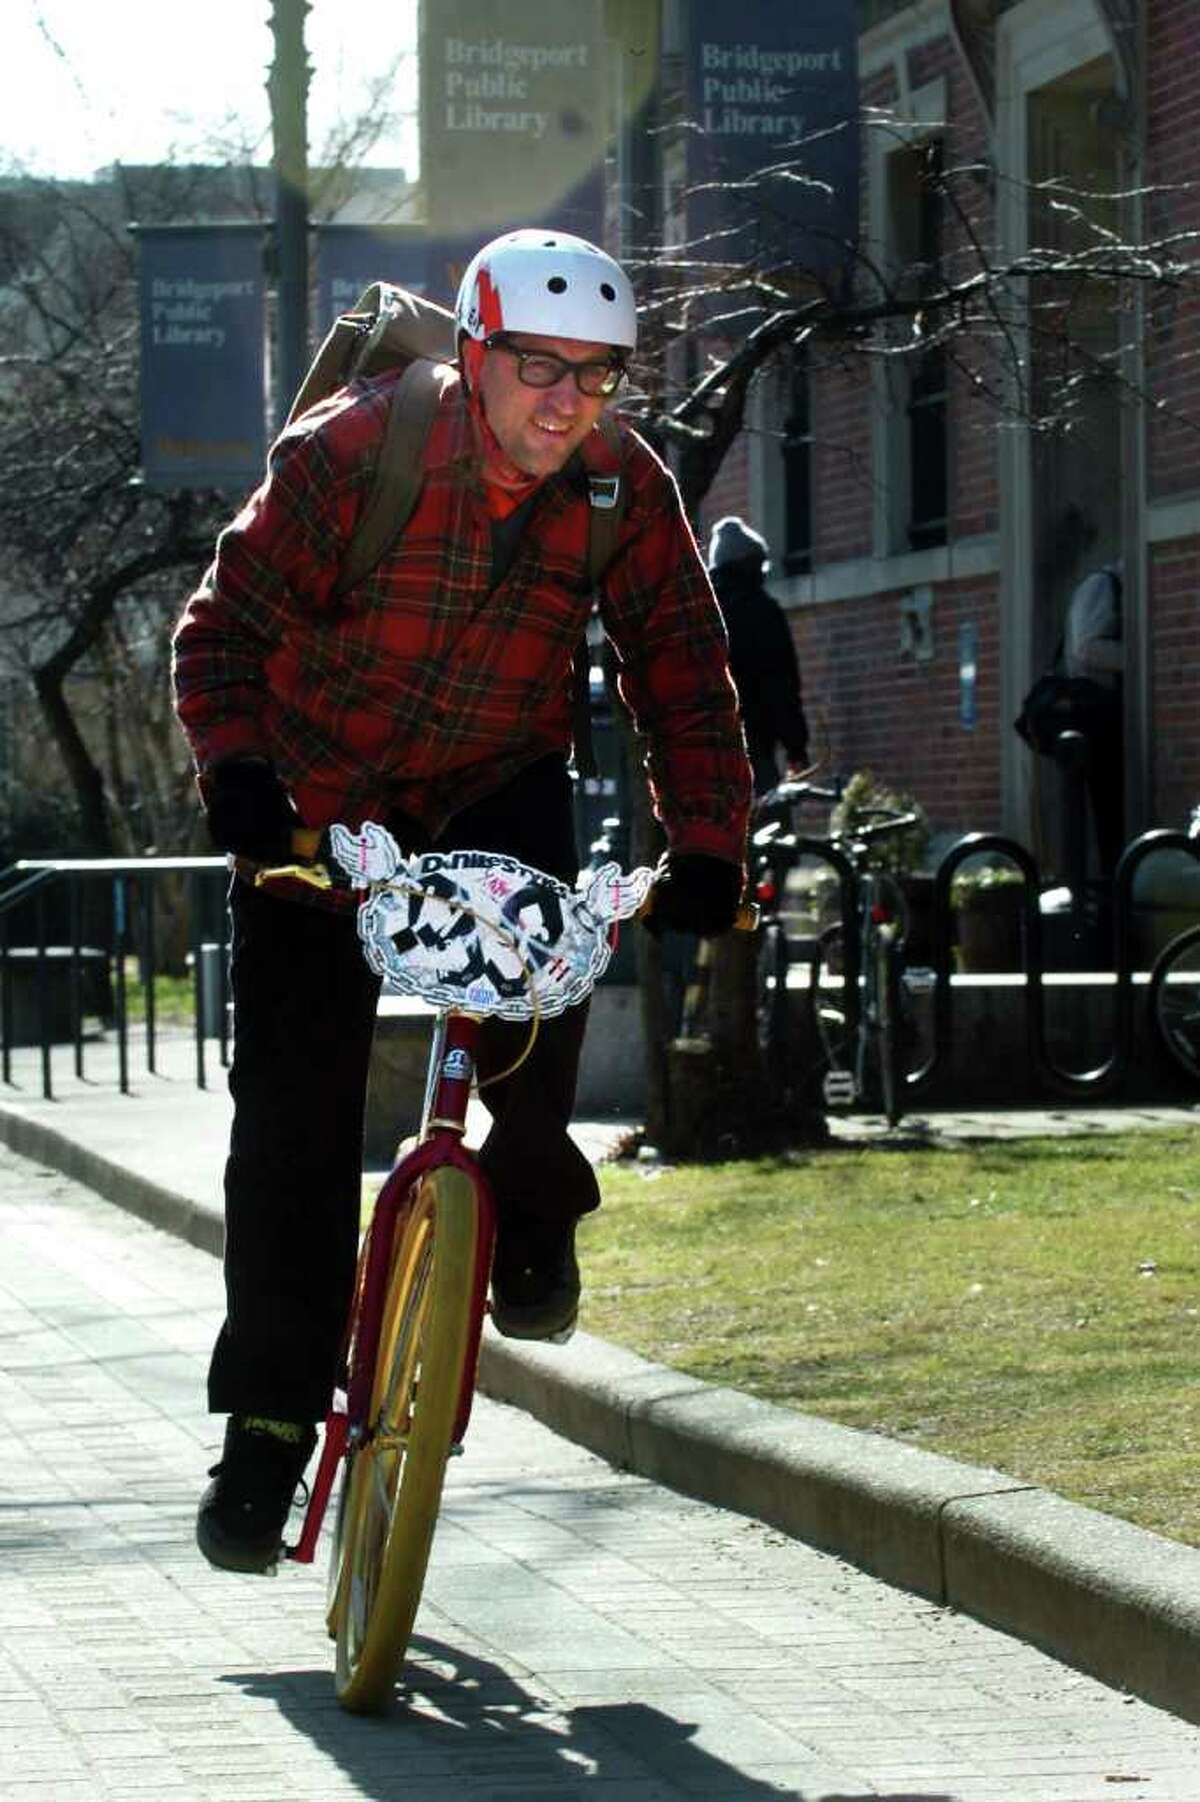 John Wilkins, of Bridgeport, rides his bicycle after returning books to the Burroughs & Saden Library in downtown Bridgeport, Conn. Feb. 10th, 2012.